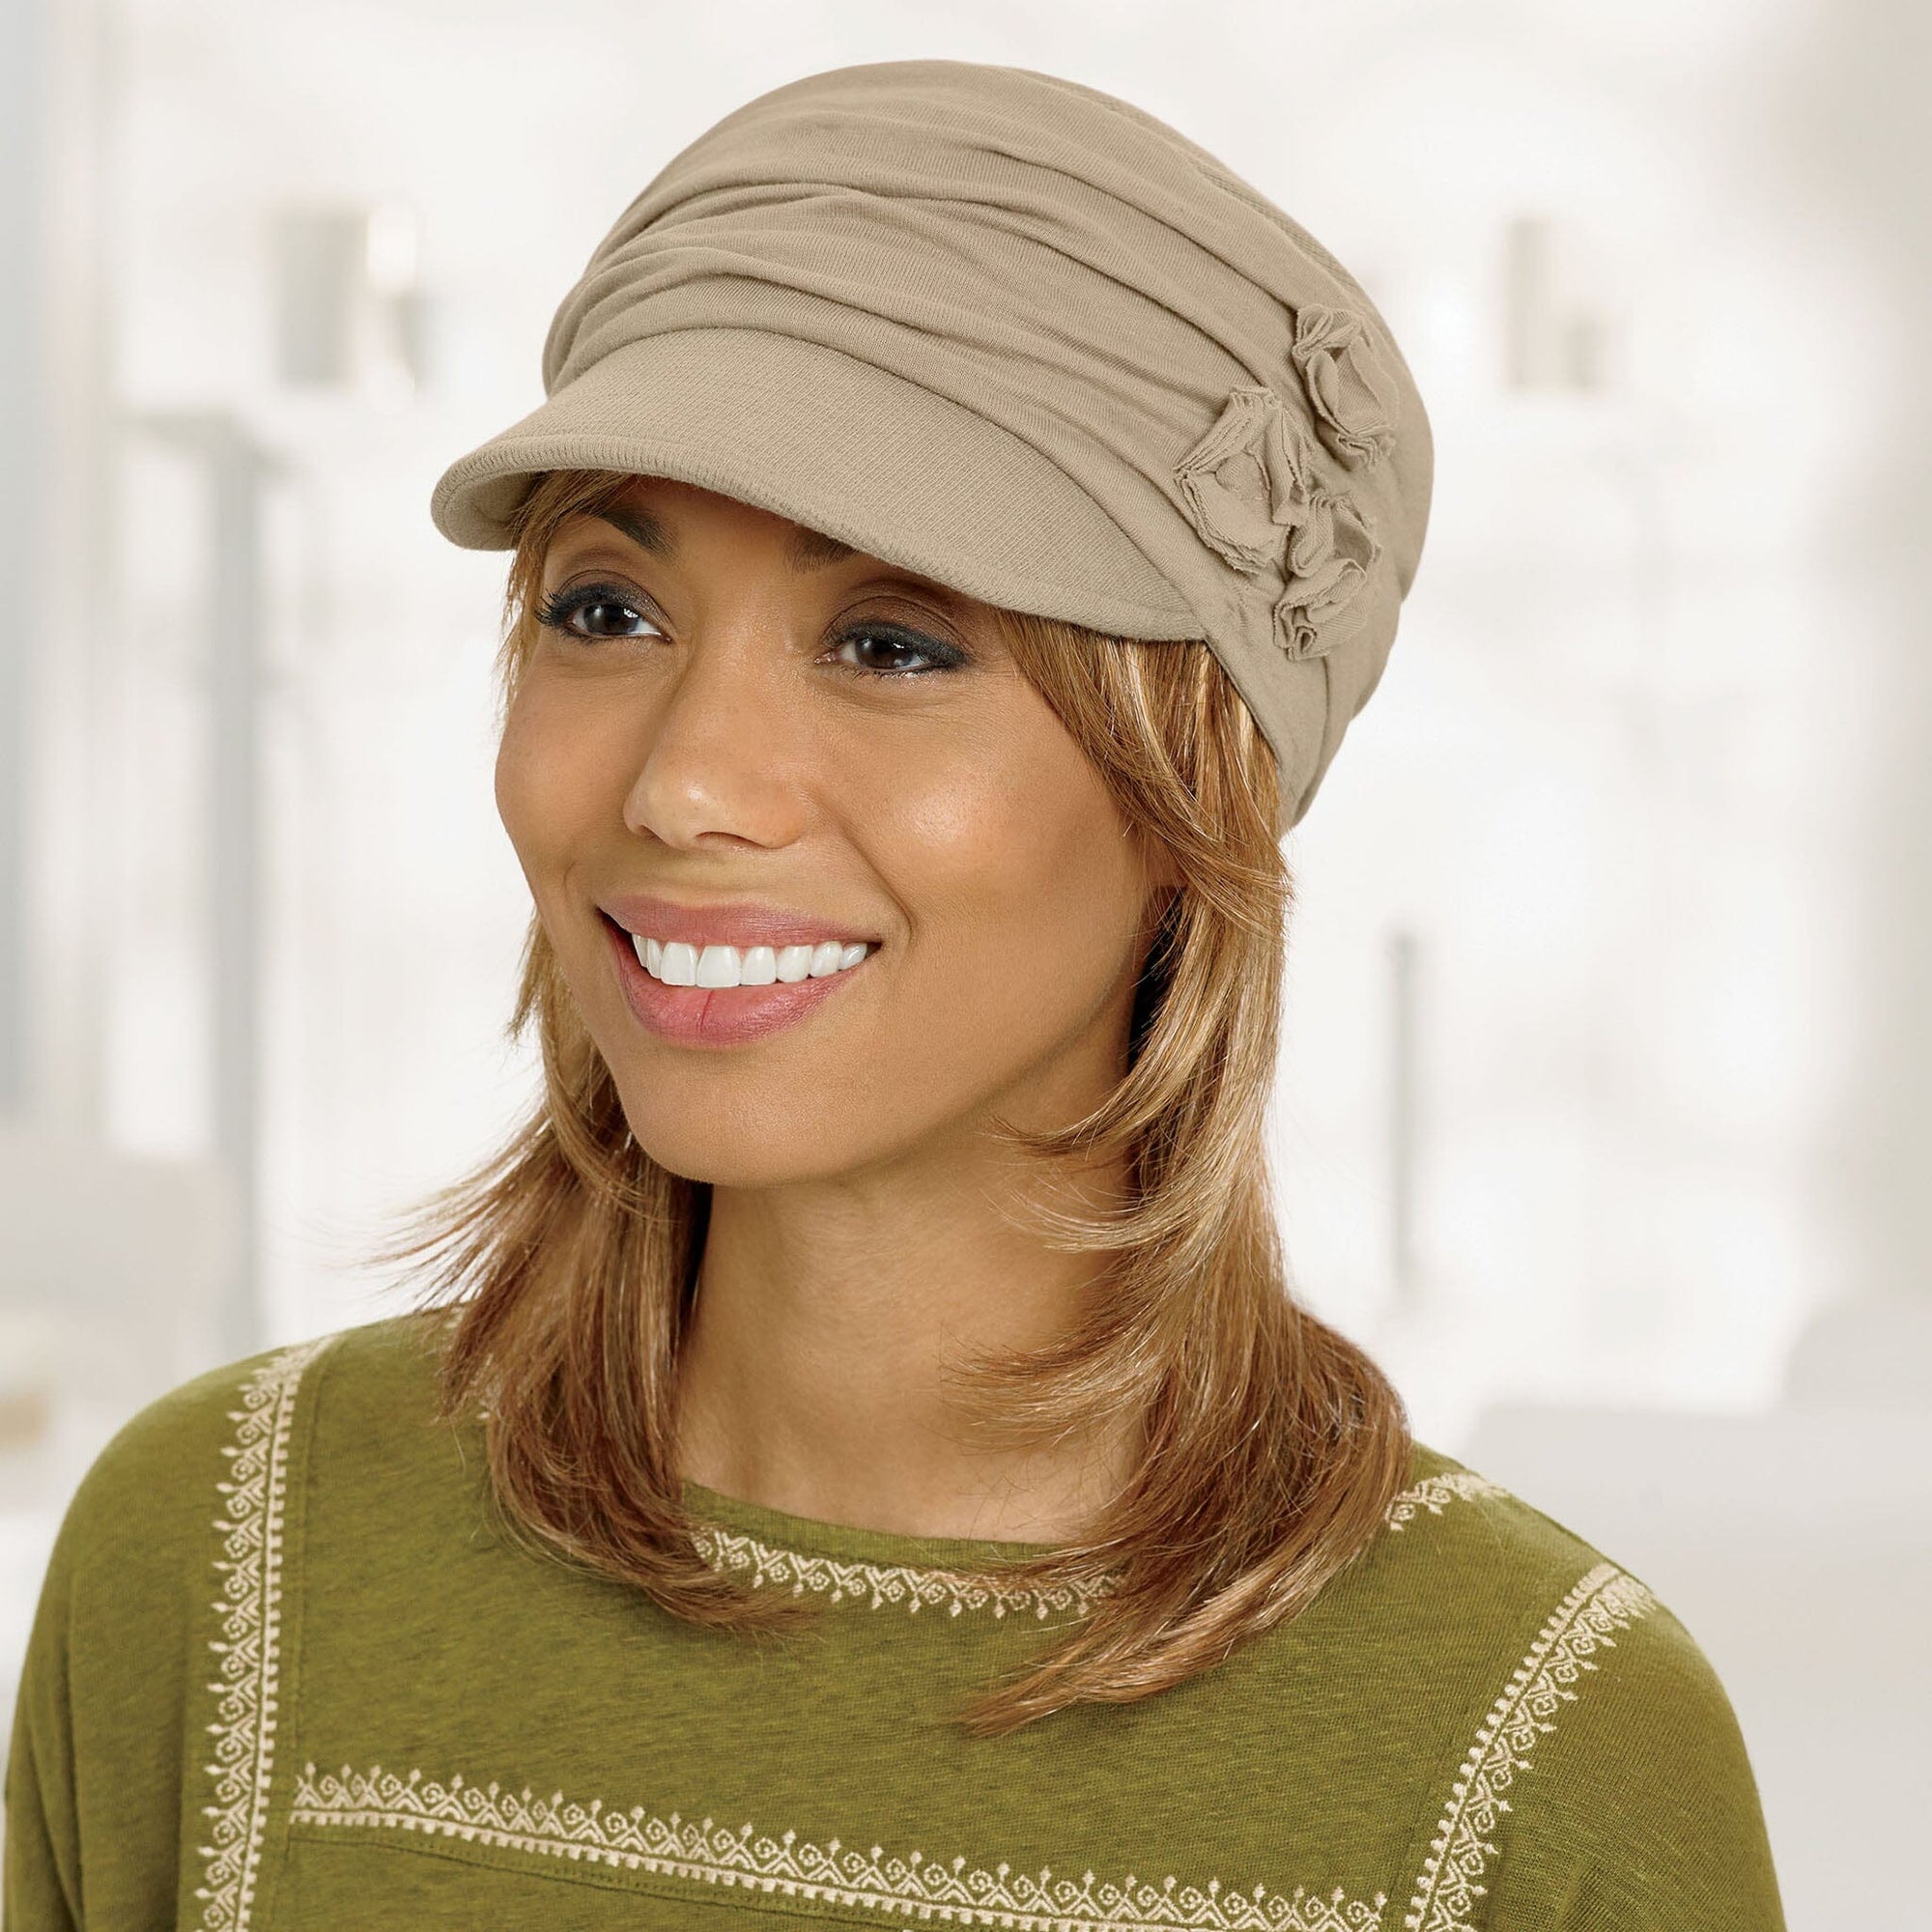 Shown in Heather Grey with Mid-Length Halo with Bang (#8374), in (1621) Sunkissed Blonde